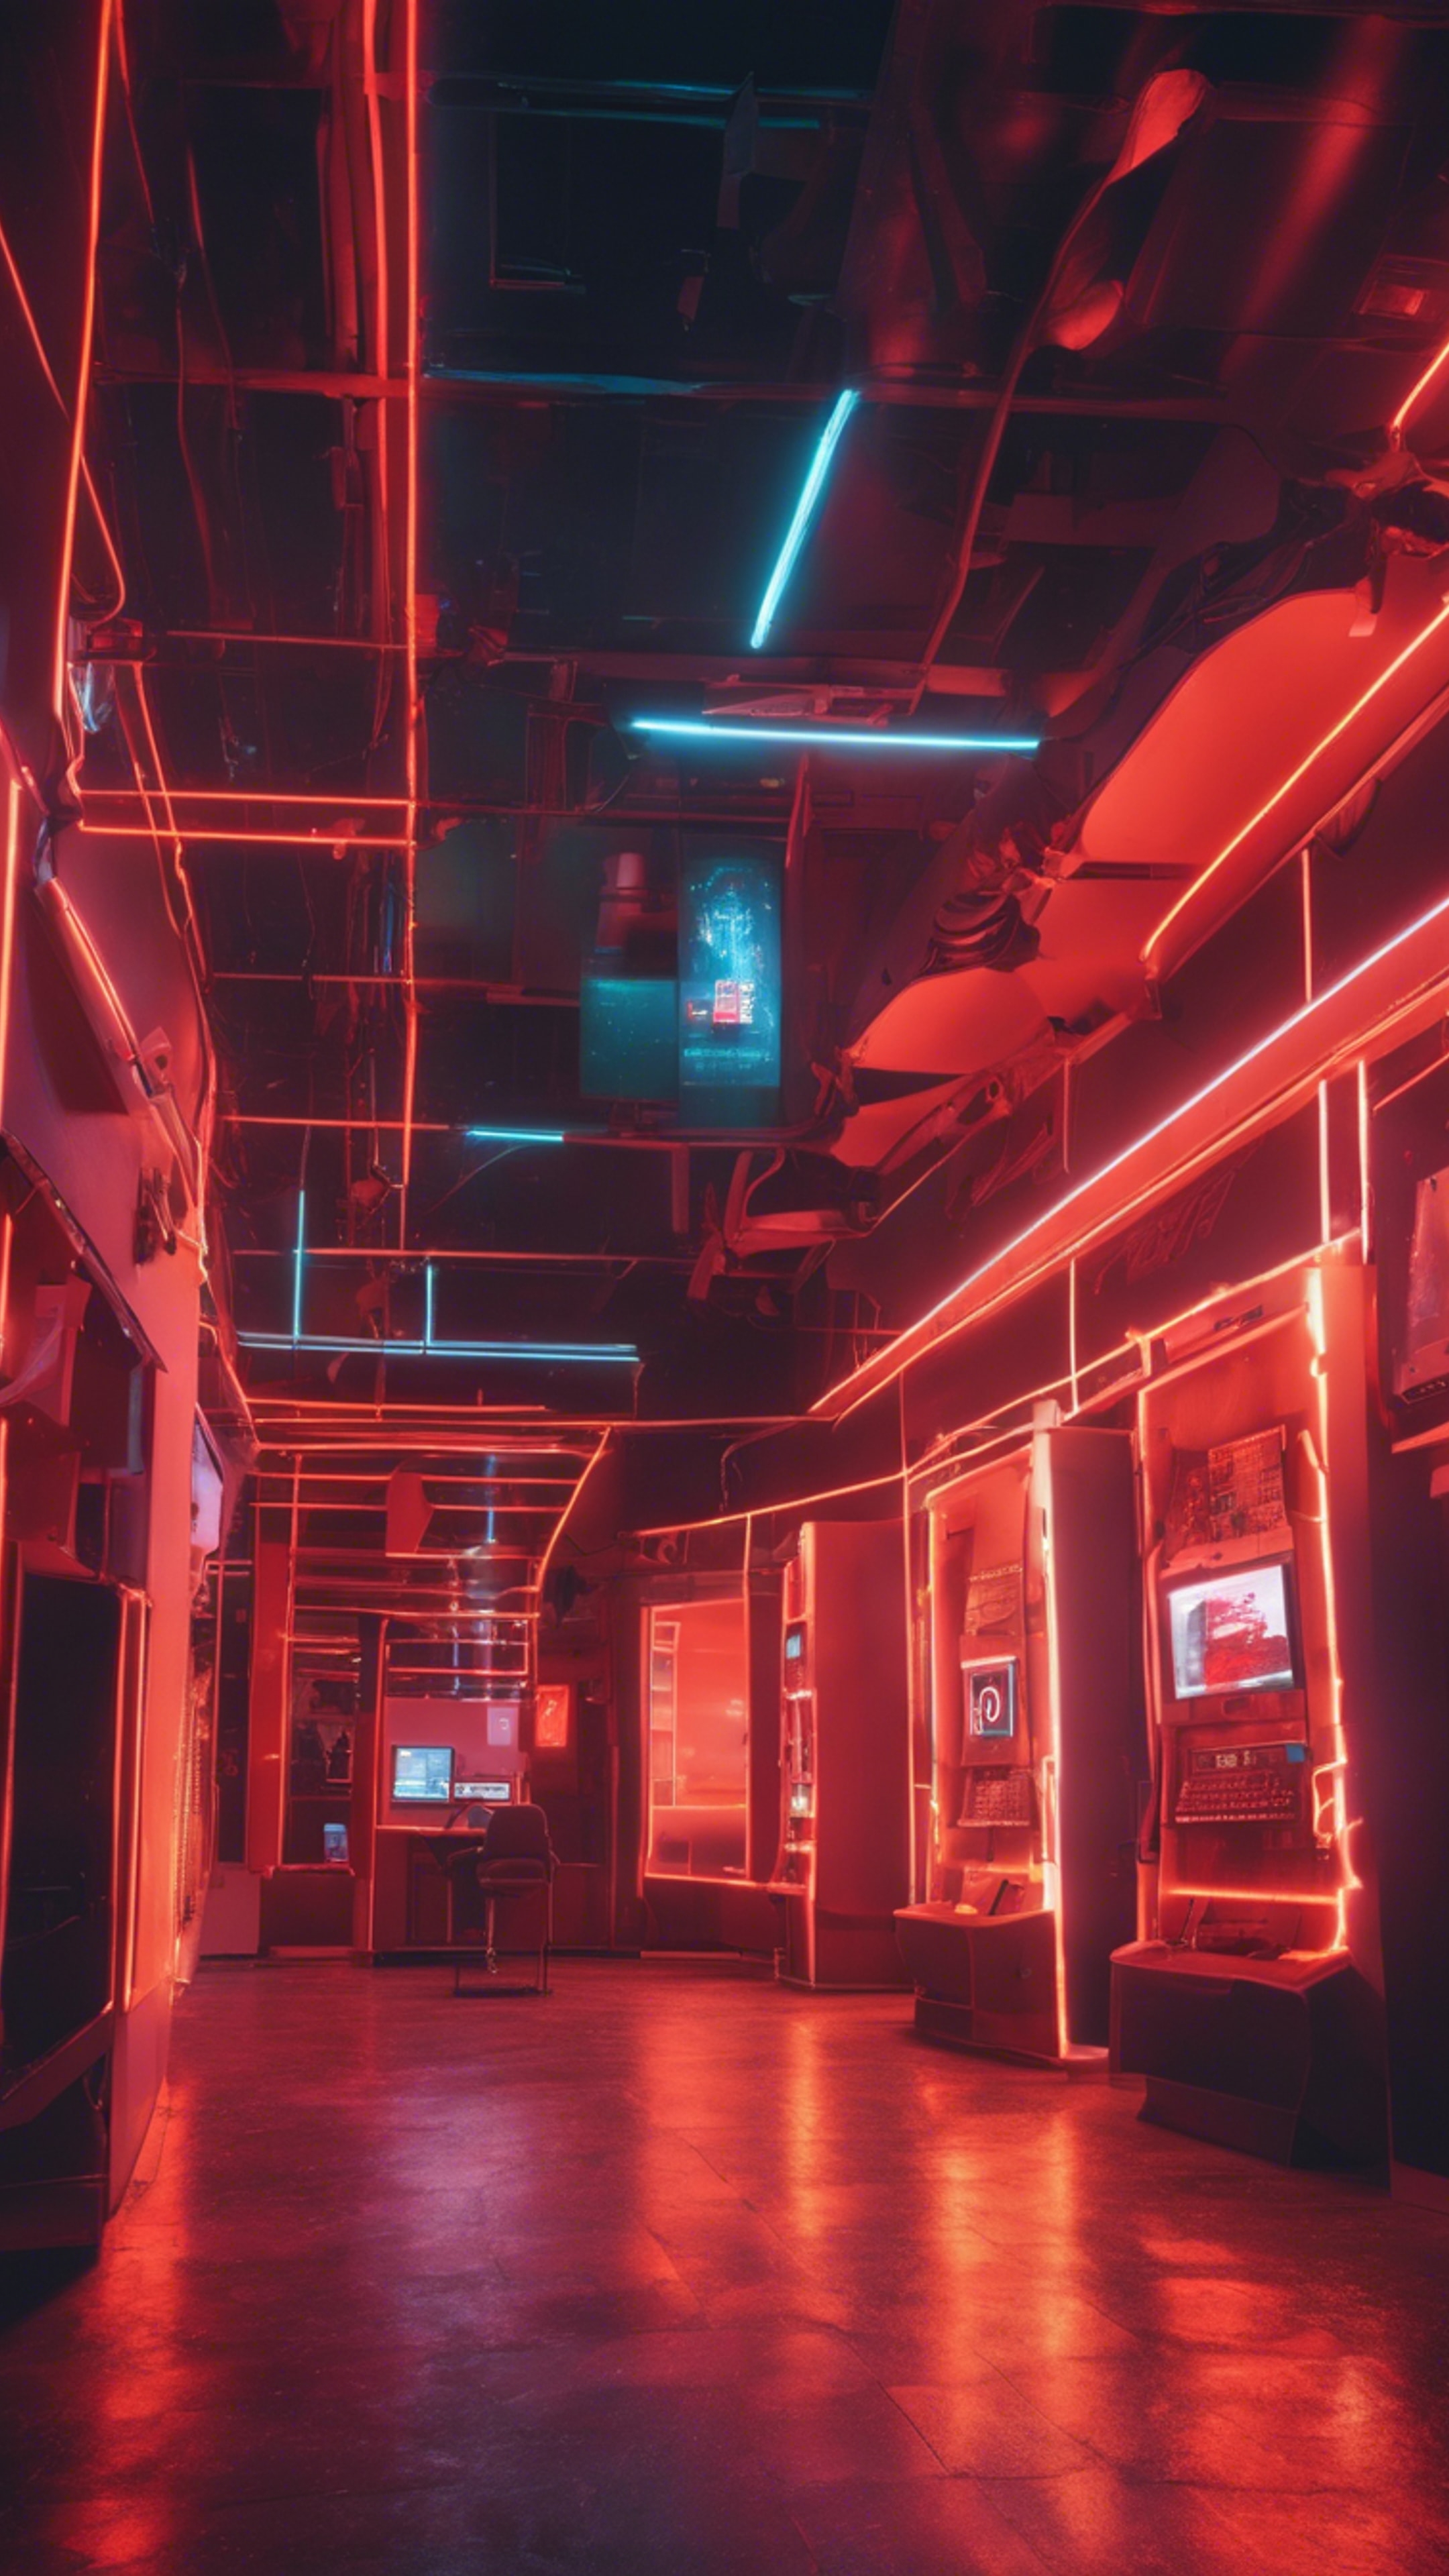 An architecturally unique cyber cafe glowing with neon red and orange lights at night. Tapet[37c23e18da0f466d9ff8]